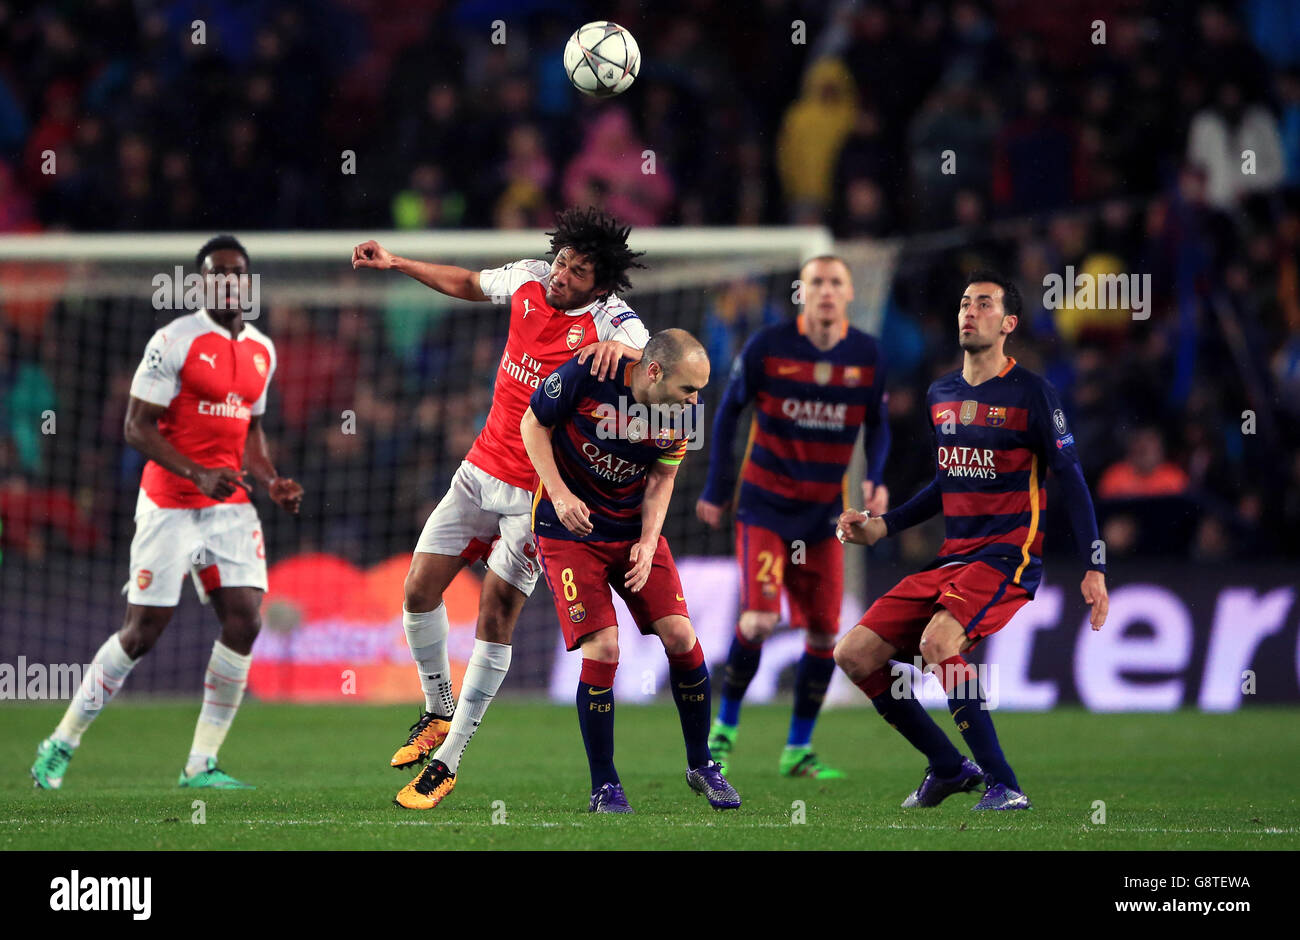 Barcelona v Arsenal - UEFA Champions League - Round of Sixteen - Second Leg - Camp Nou. Arsenal's Mohamed Elneny and Barcelona's Andres Iniesta (right) battle for the ball Stock Photo